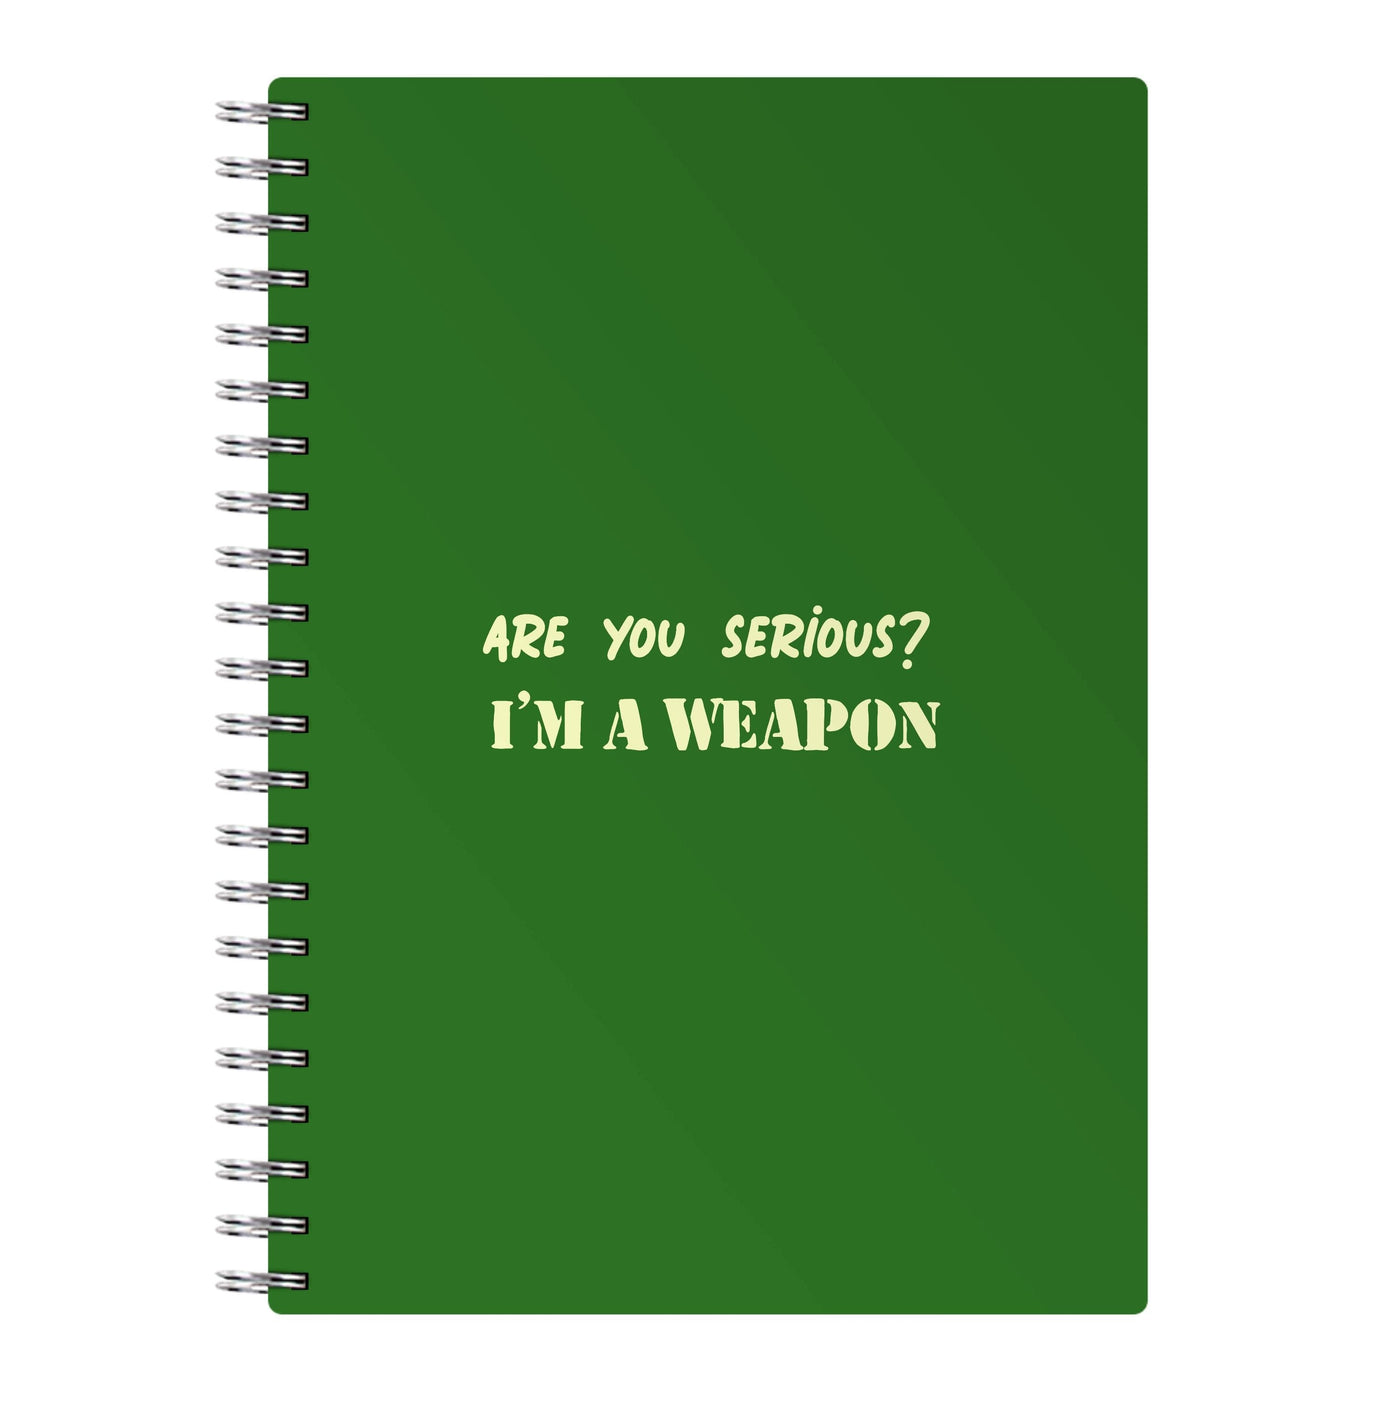 Are You Serious? I'm A Weapon - Islanders Notebook